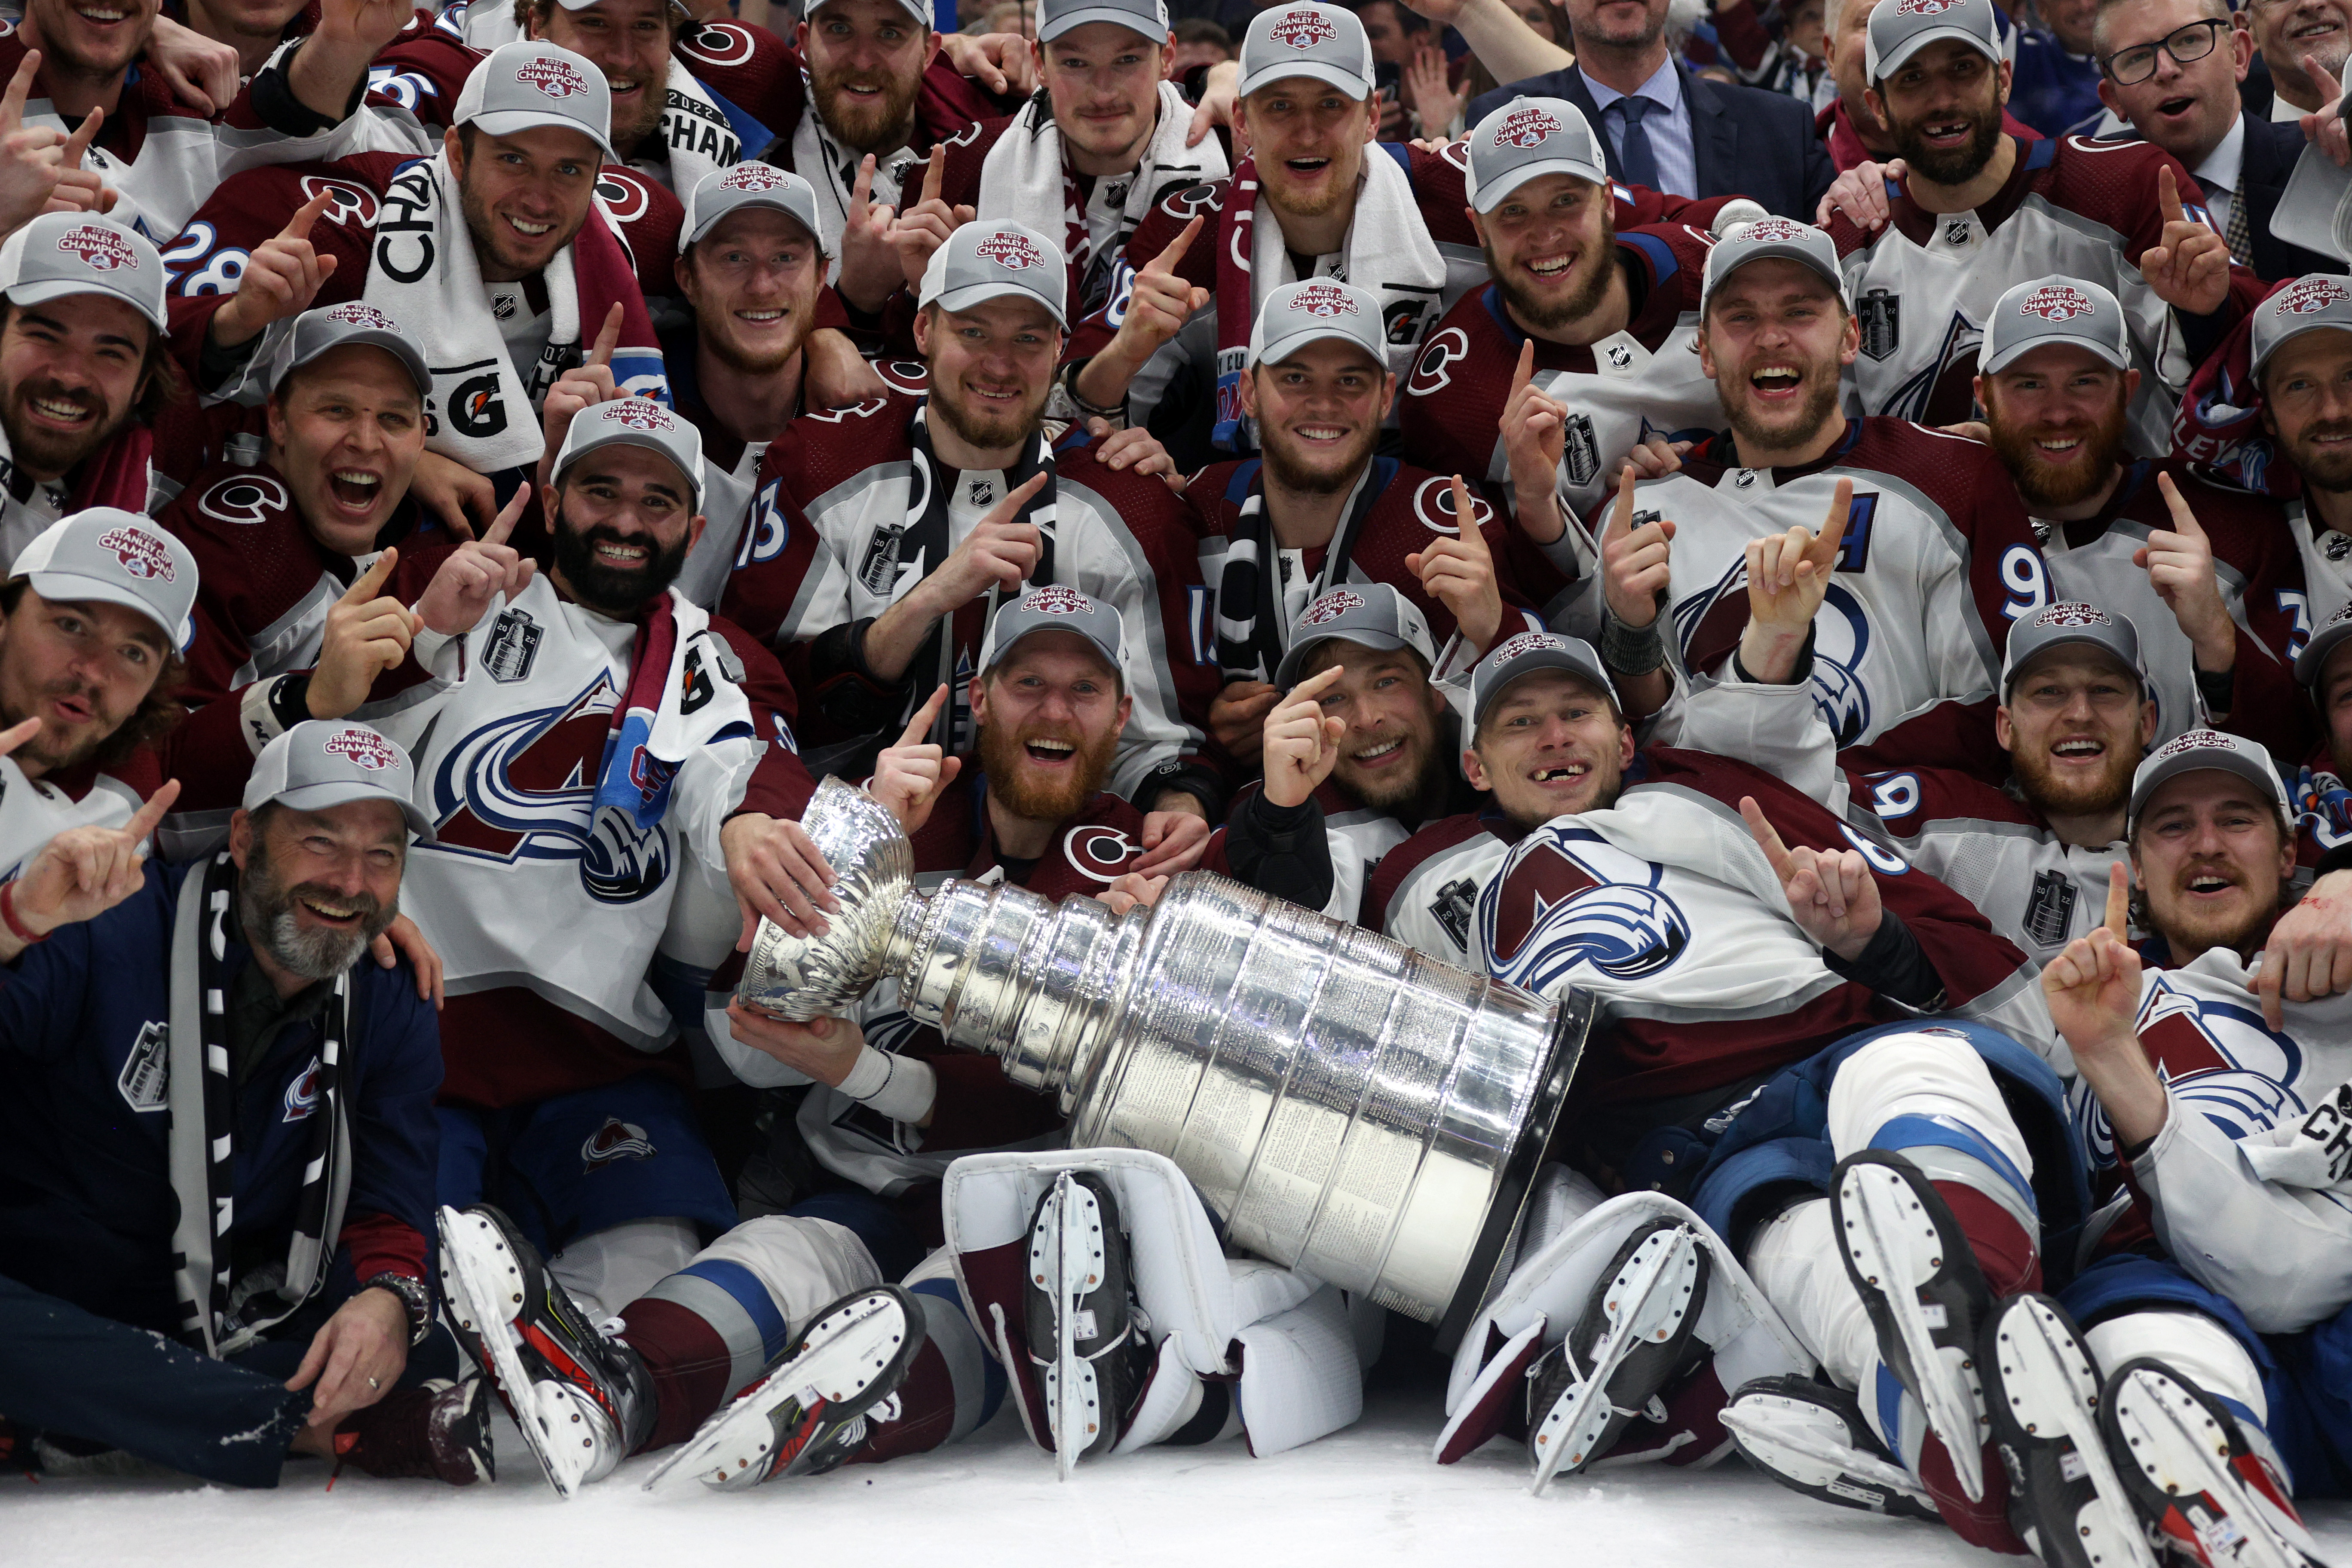 Stanley Cup Final News: 20 Years in the Making for the Avalanche